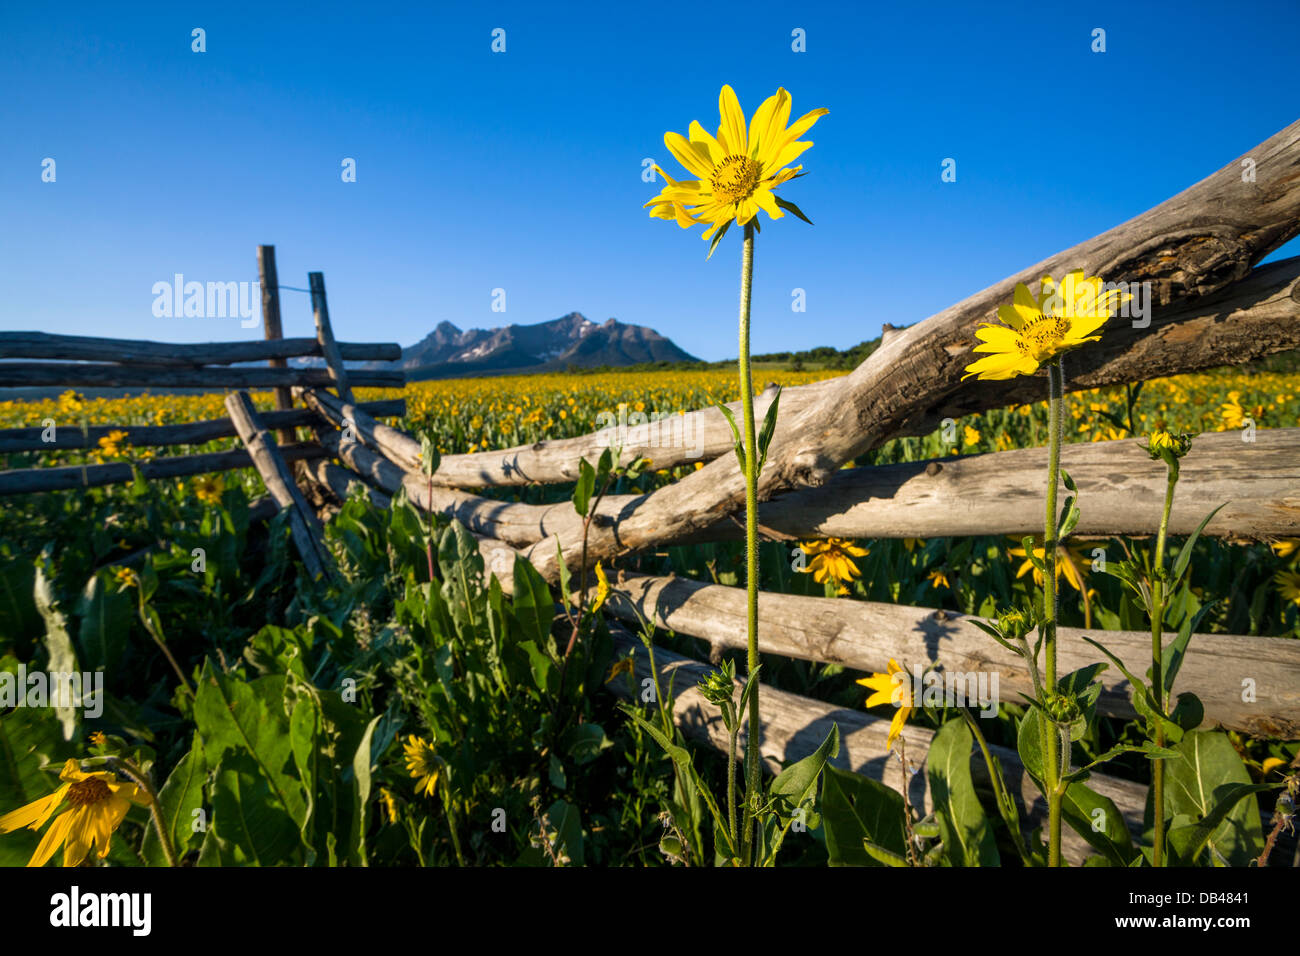 Field of sunflowers on Hastings Mesa, southwest Colorado. Stock Photo